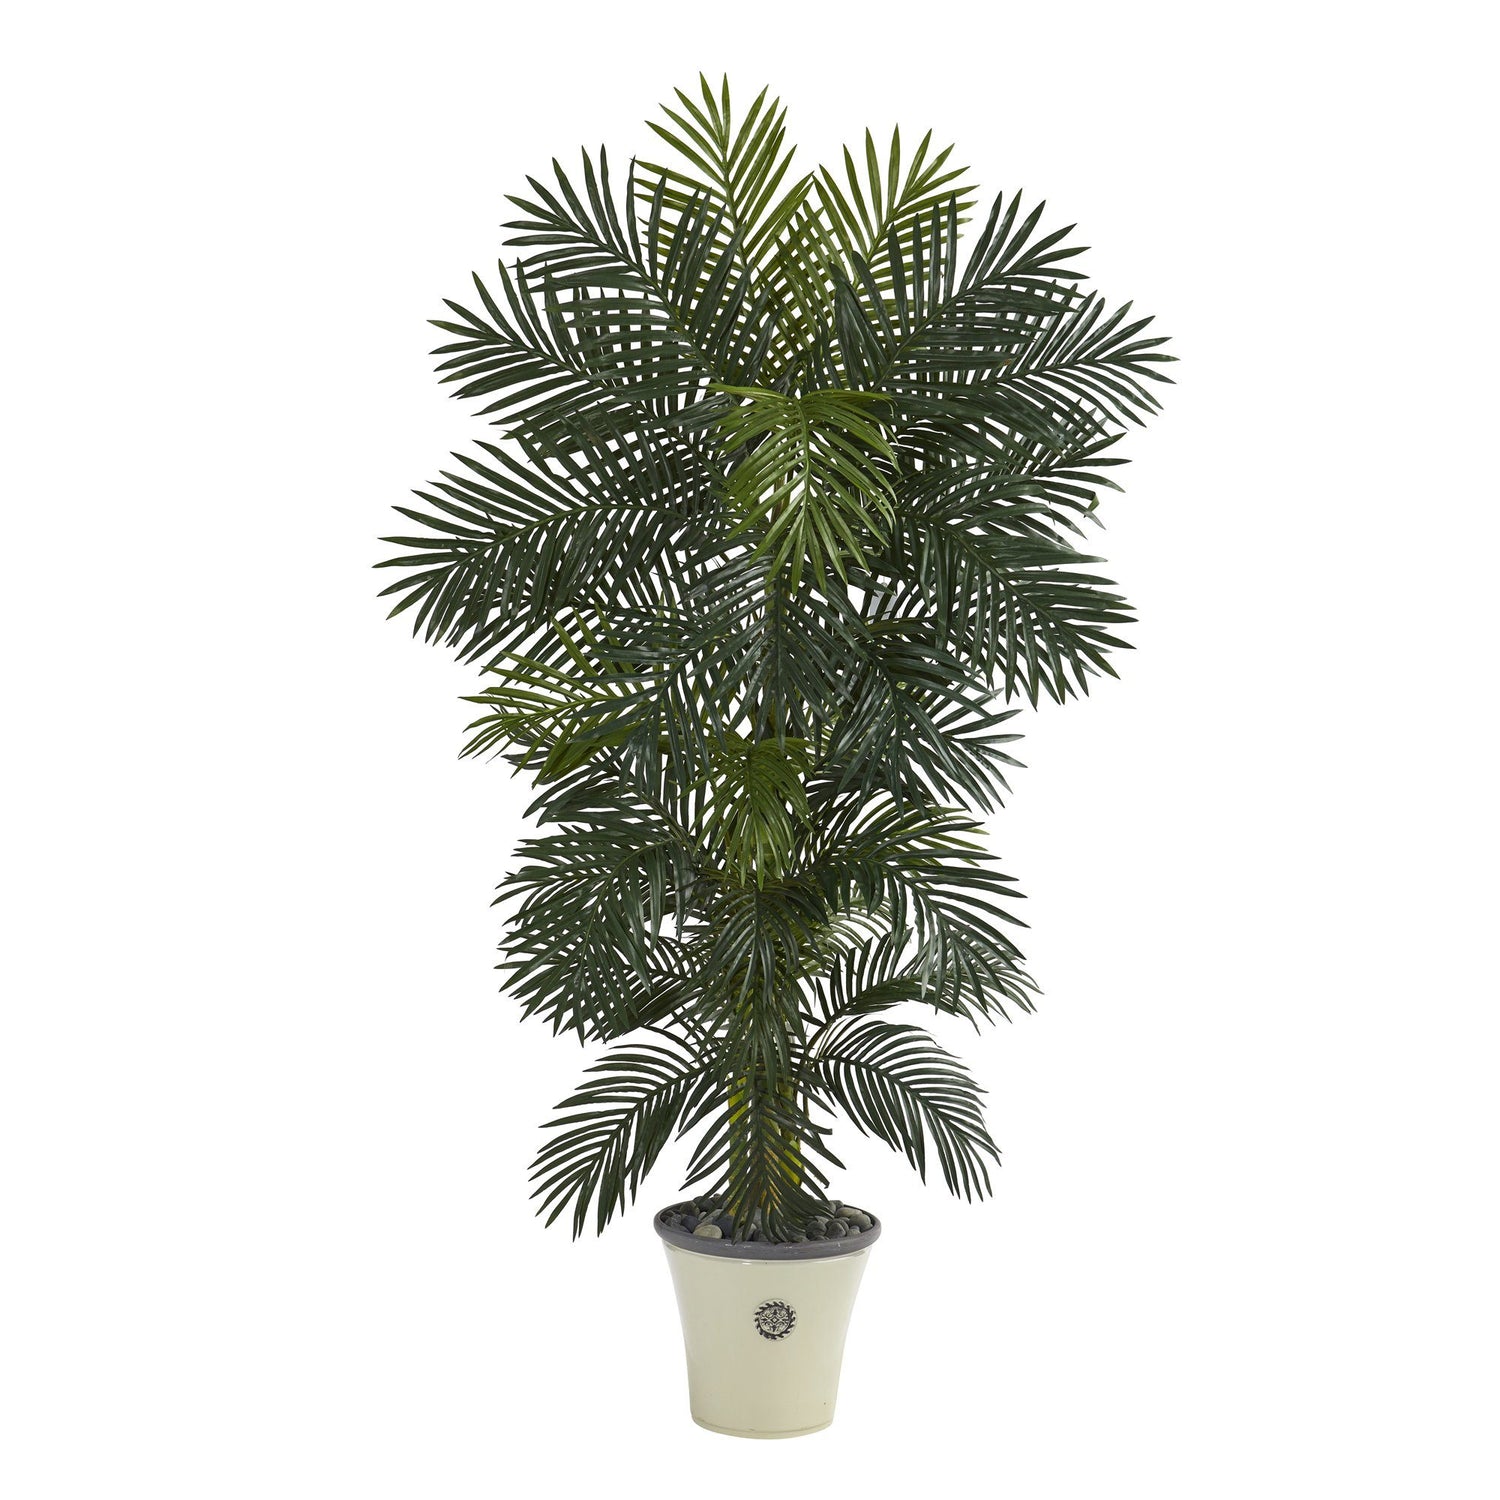 74” Golden Cane Artificial Palm Tree in Decorative Planter